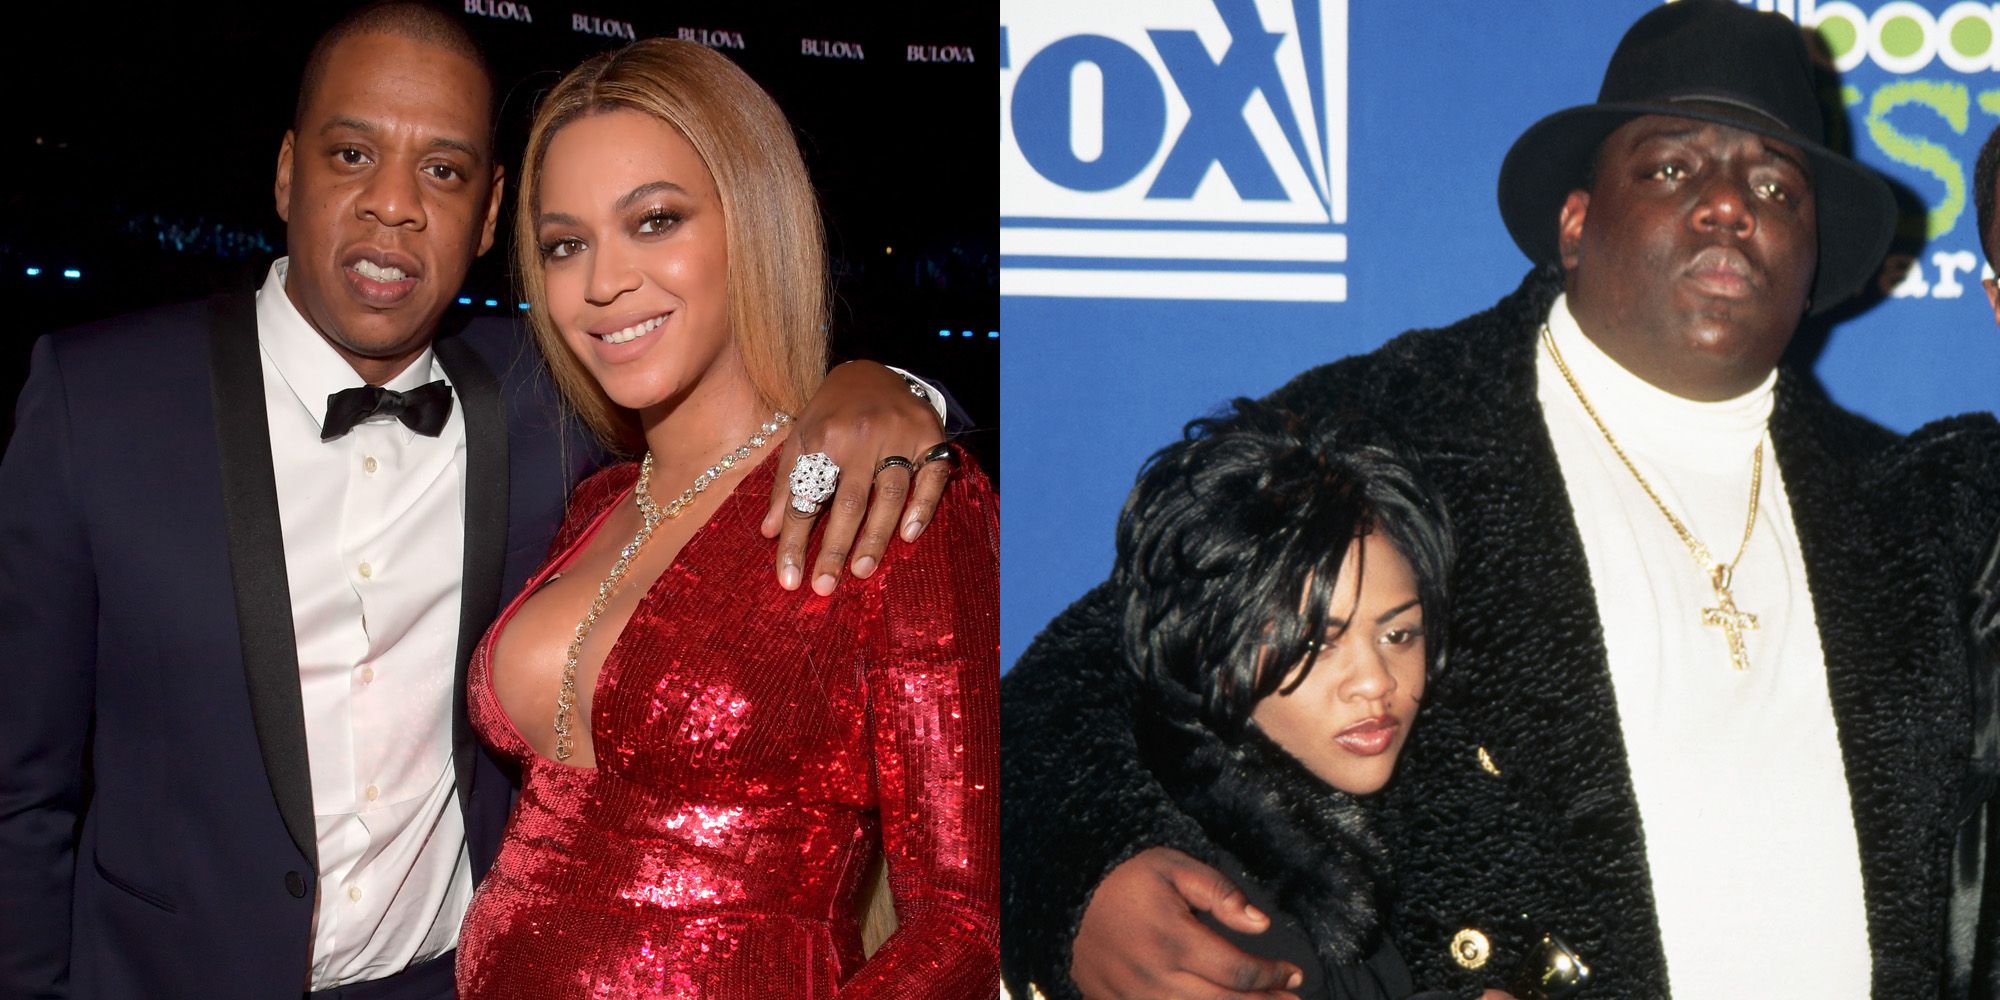 Beyonce And Jay Z Dress Up As Lil Kim And Biggie For Halloween.